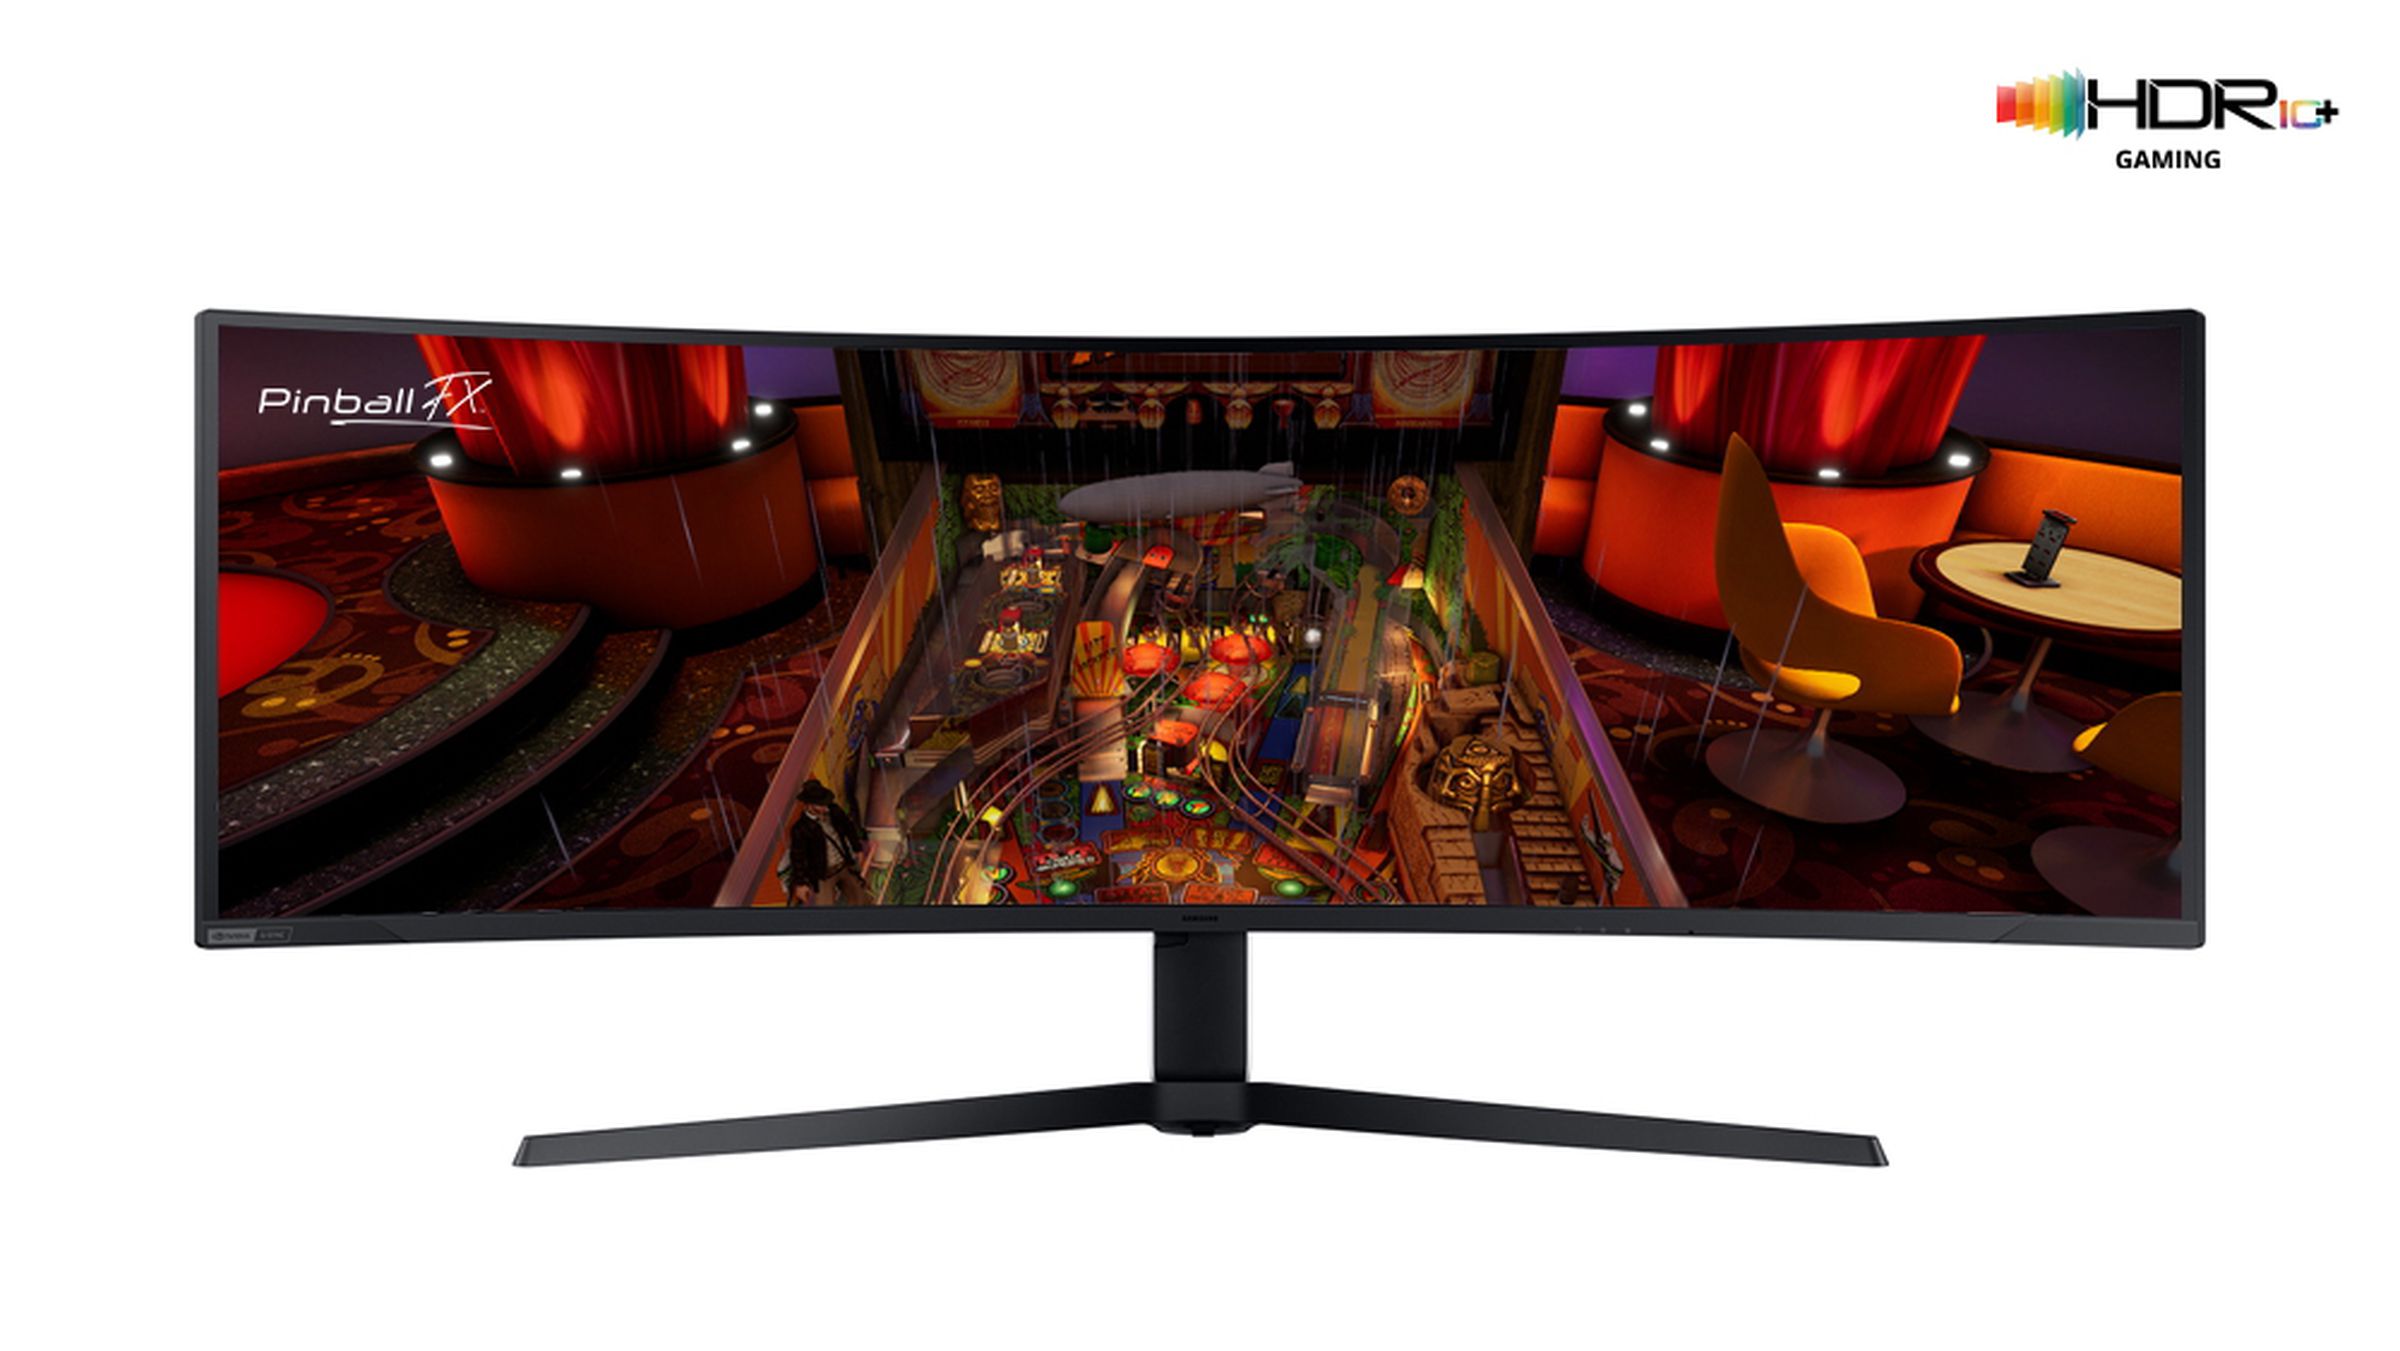 An unnamed Samsung Odyssey-like curved gaming monitor with the new HDR10+ gaming compatible Pinball FX